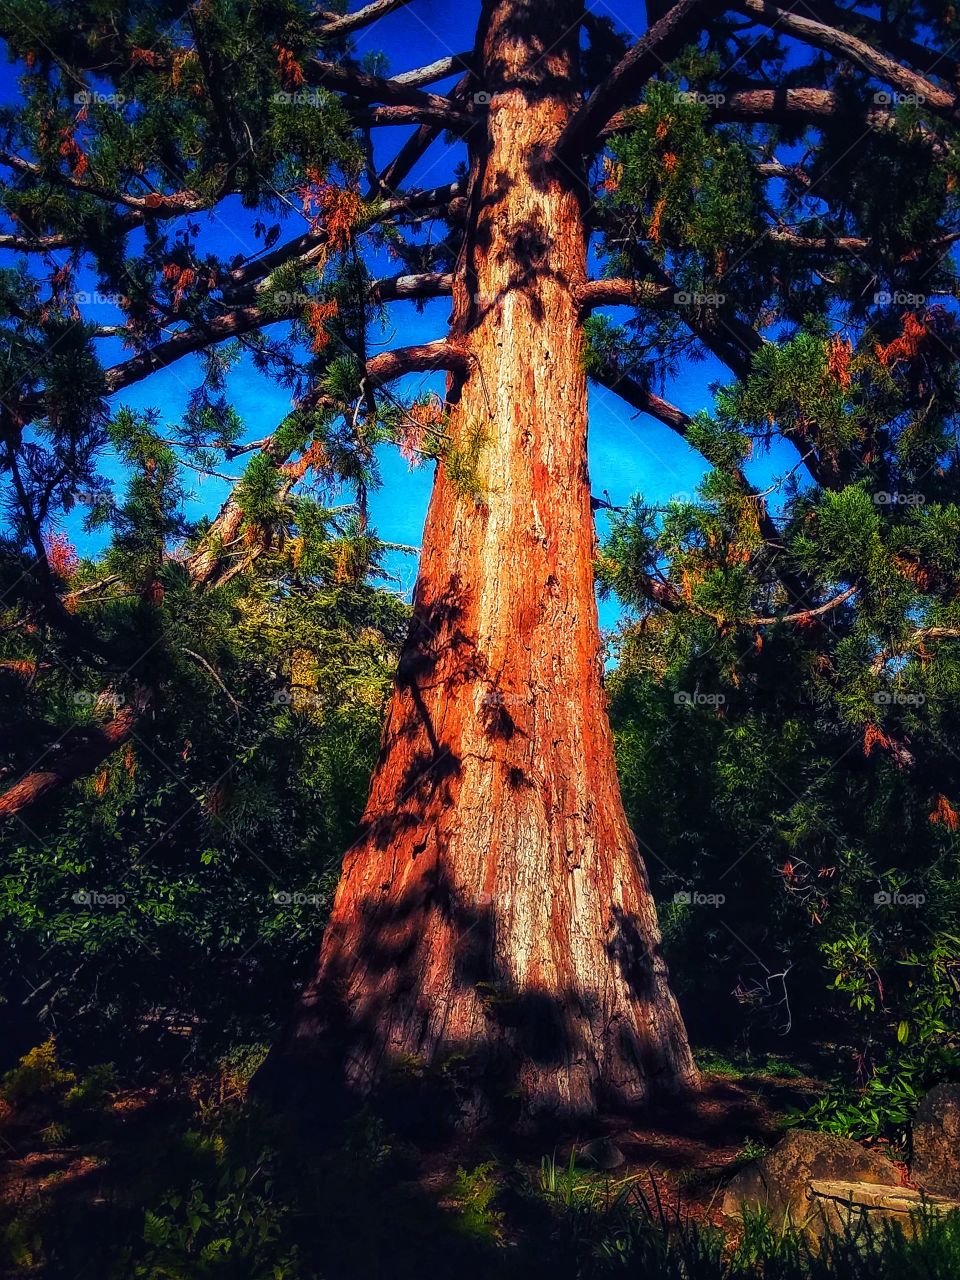 California Redwood tree in all it's magical glory